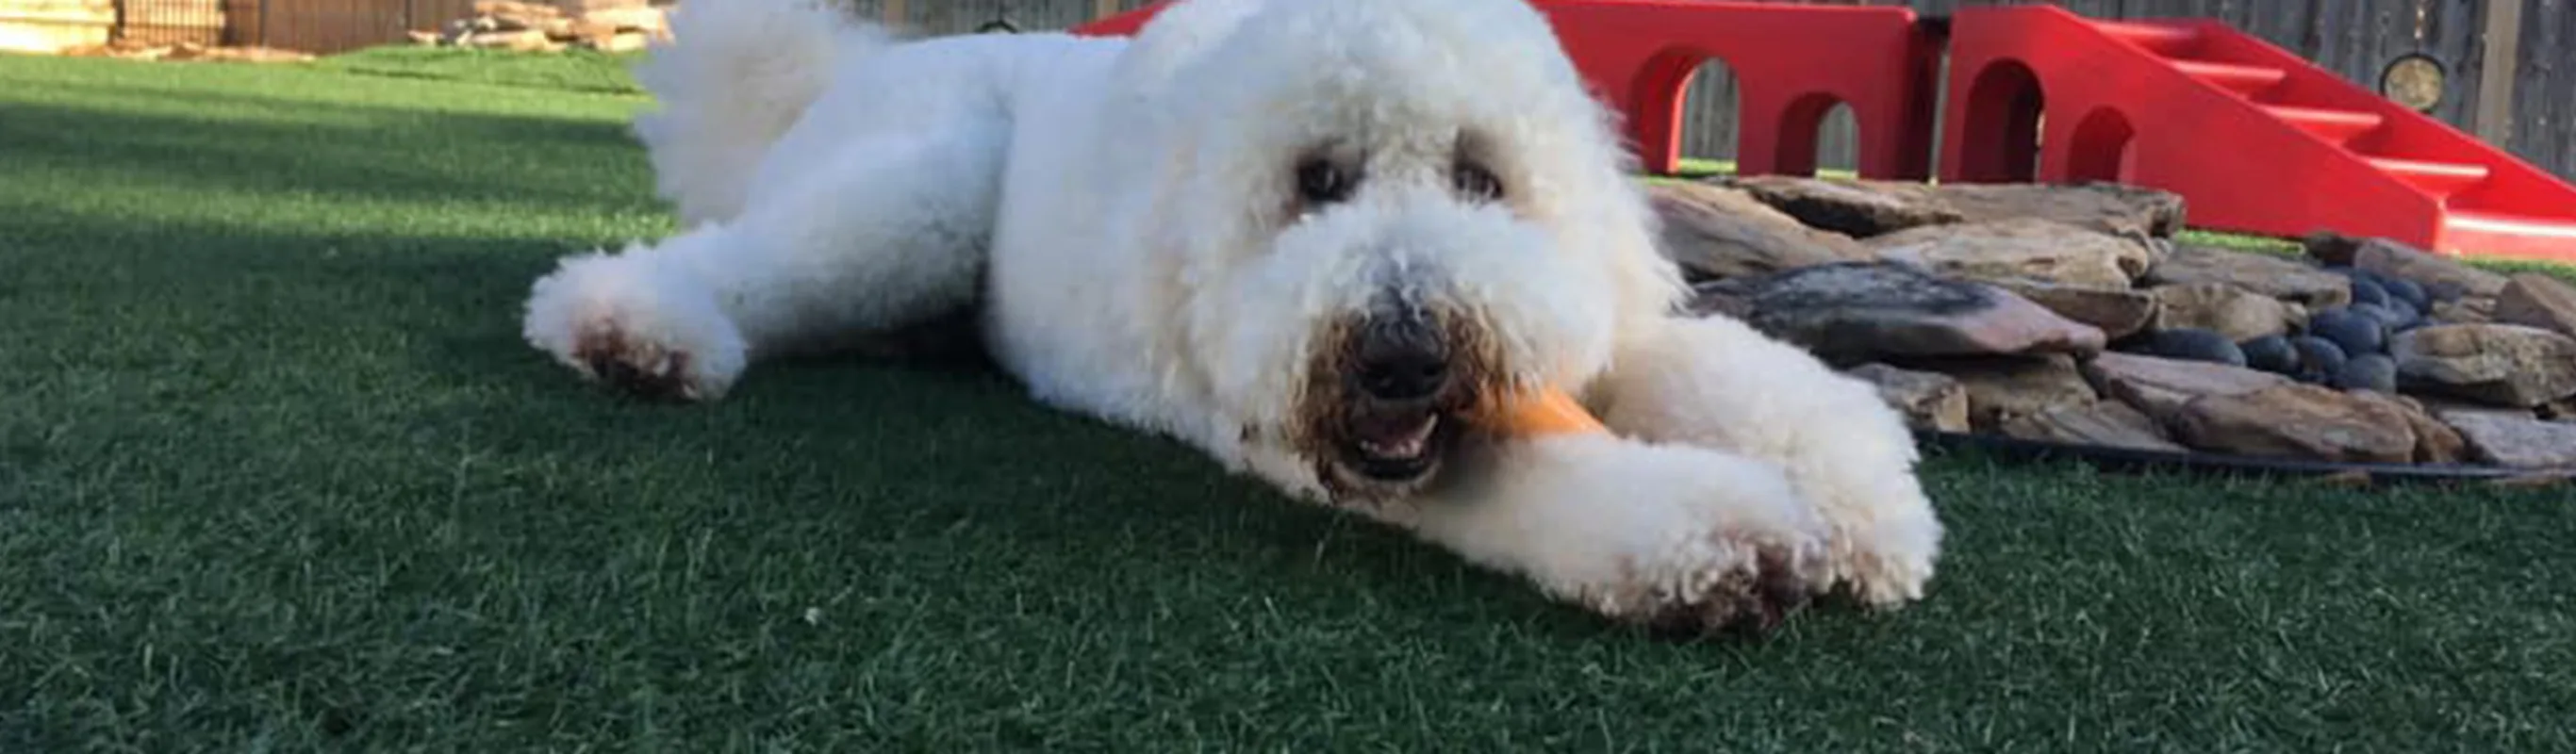 Large white dog smiling and laying on grass